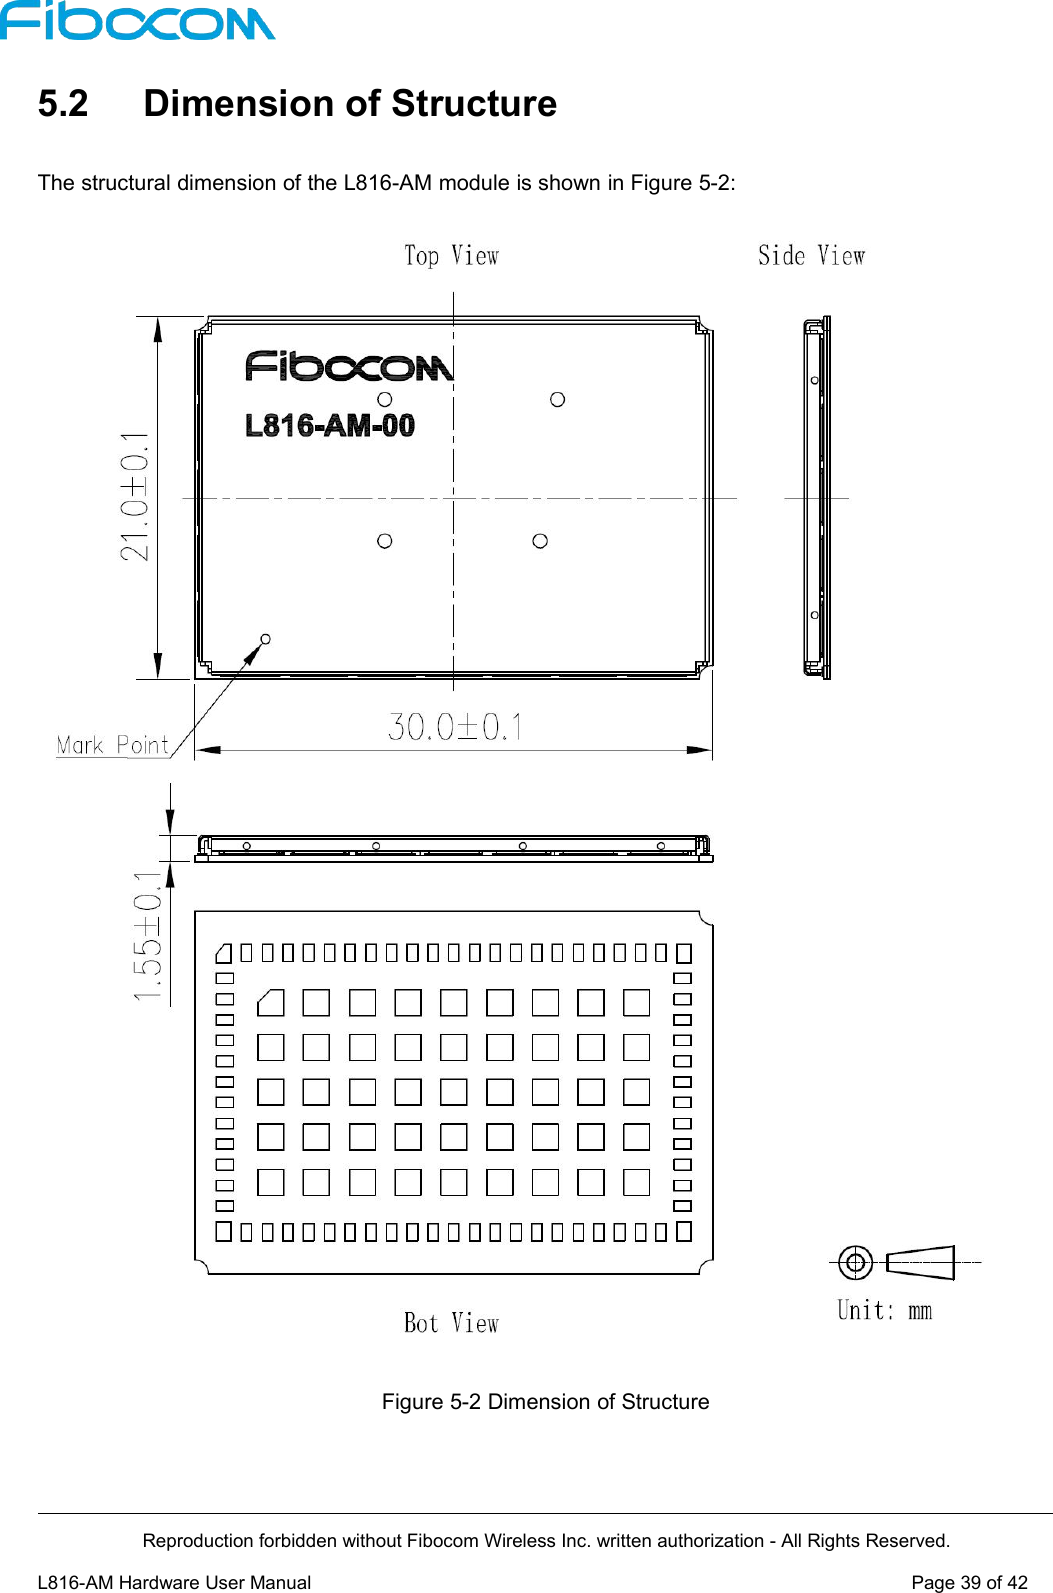 Reproduction forbidden without Fibocom Wireless Inc. written authorization - All Rights Reserved.L816-AM Hardware User Manual Page39of425.2 Dimension of StructureThe structural dimension of the L816-AM module is shown in Figure 5-2:Figure 5-2 Dimension of Structure